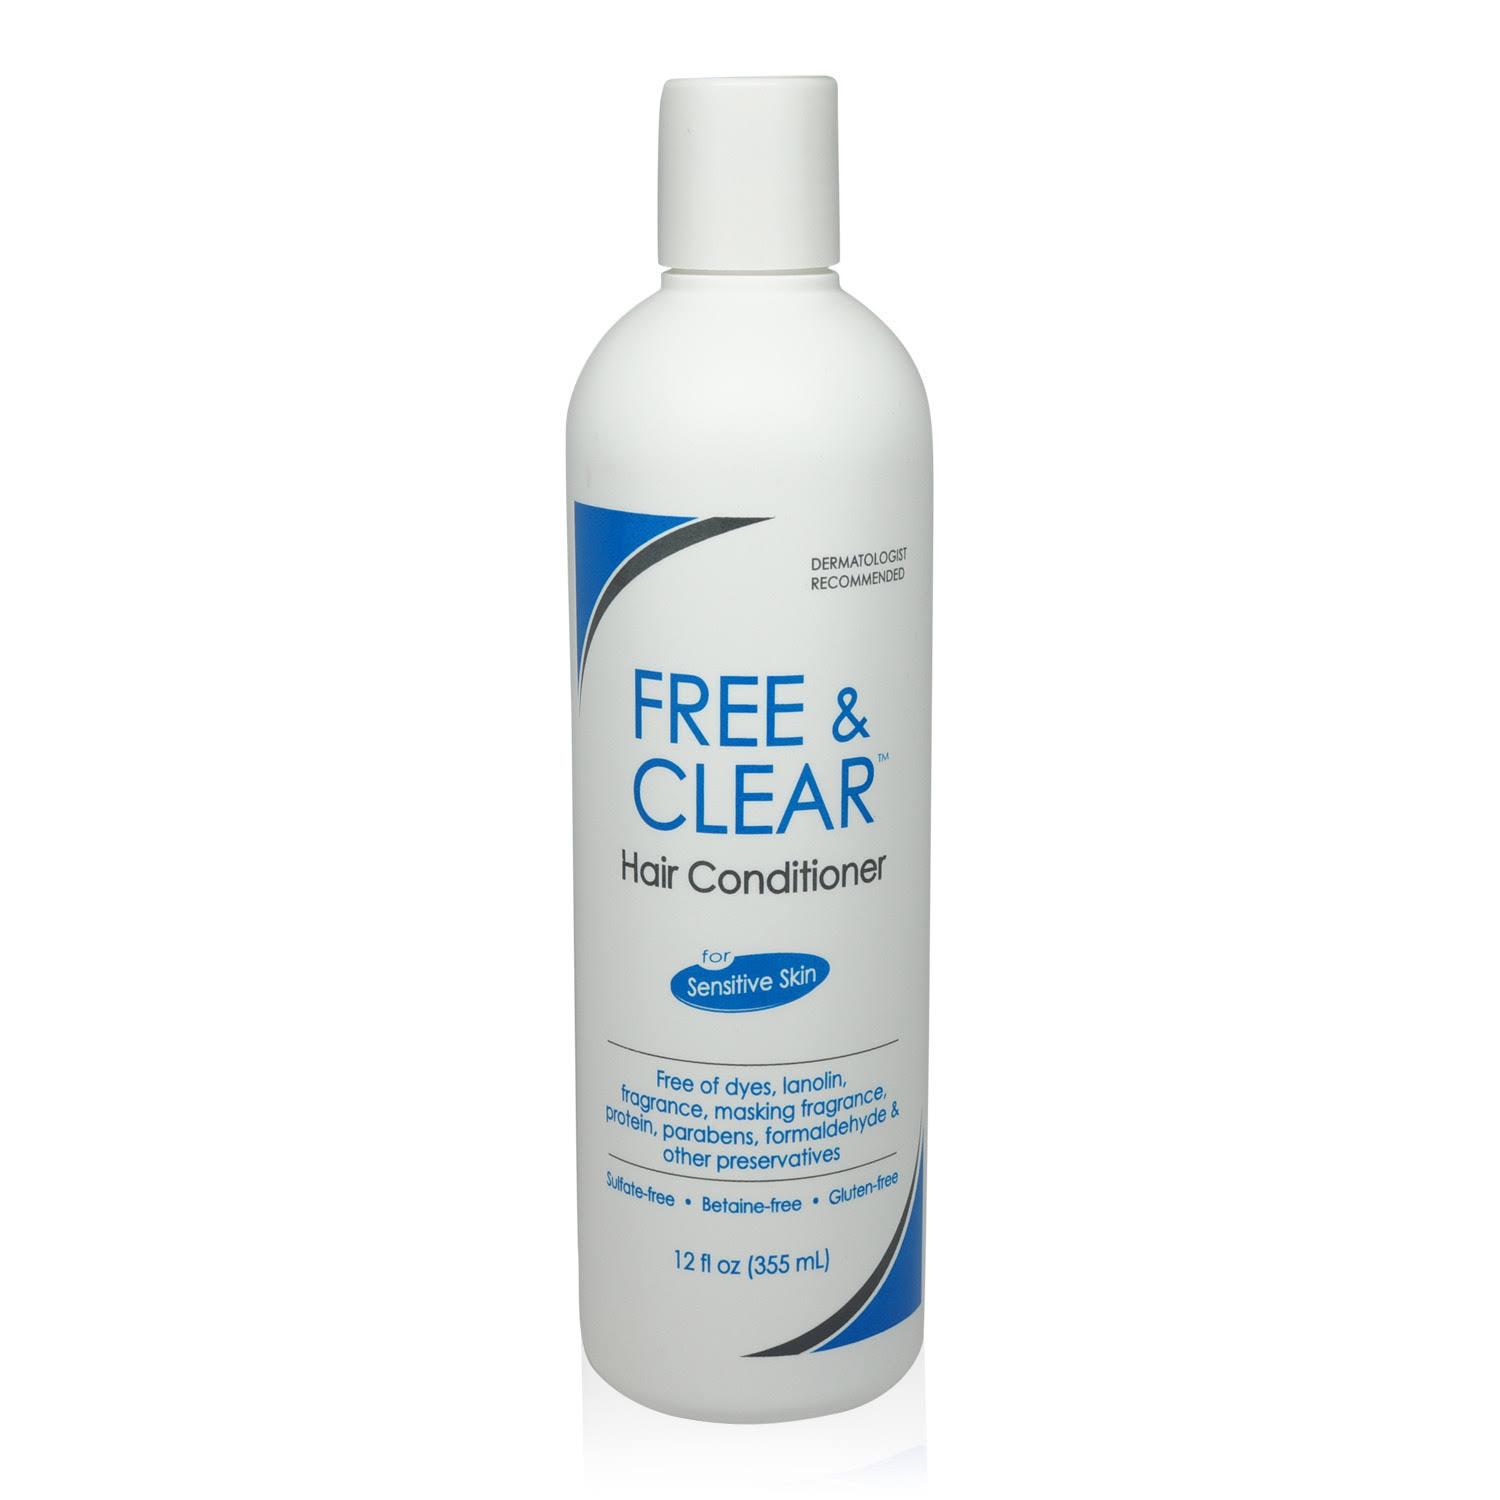 Free & Clear Hair Conditioner